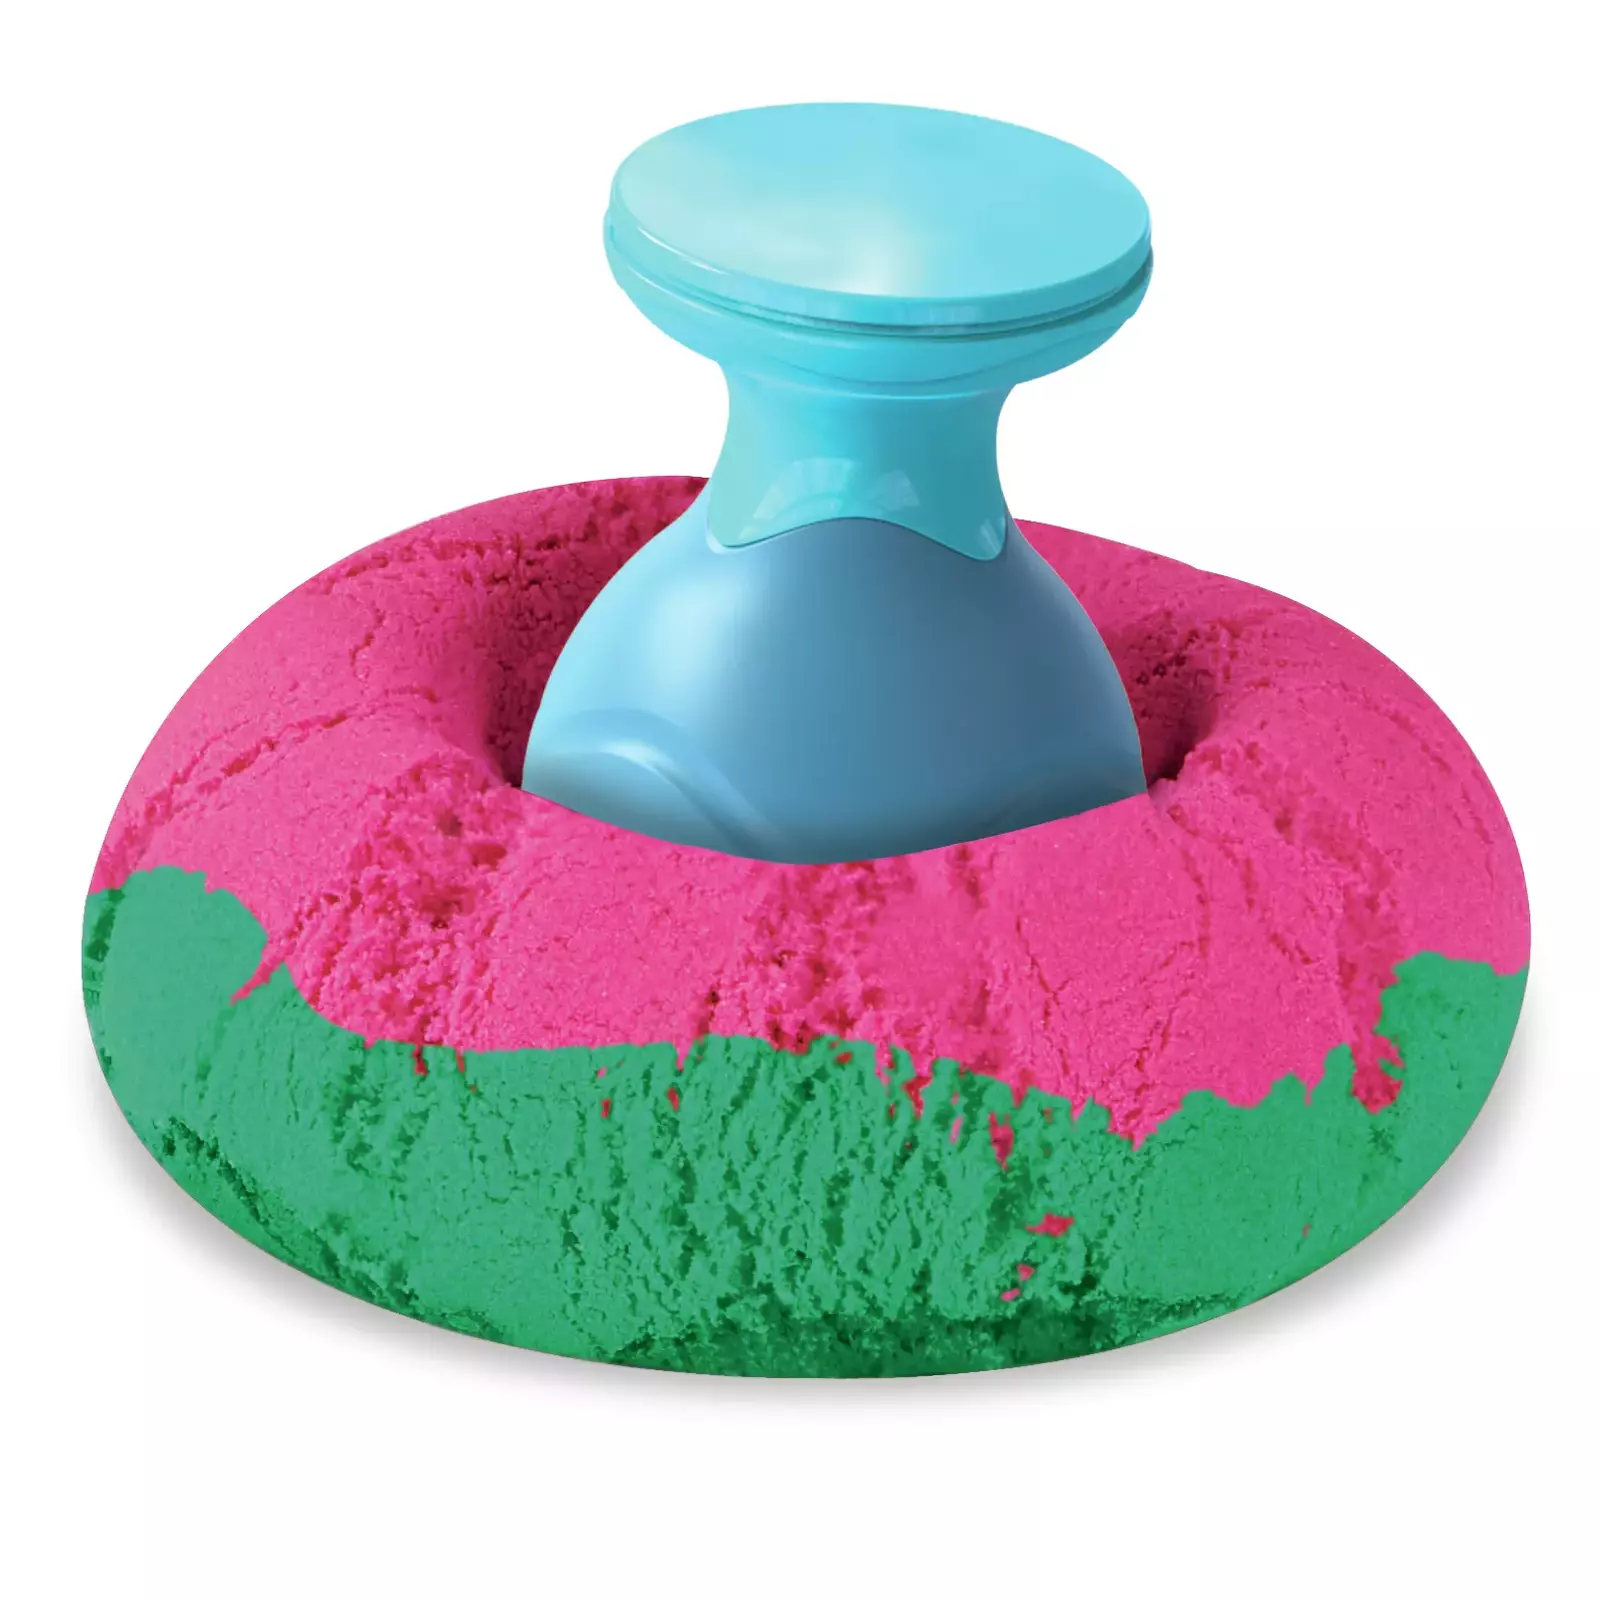  Kinetic Sand, Sandisfying Set with 2lbs of Sand and 10